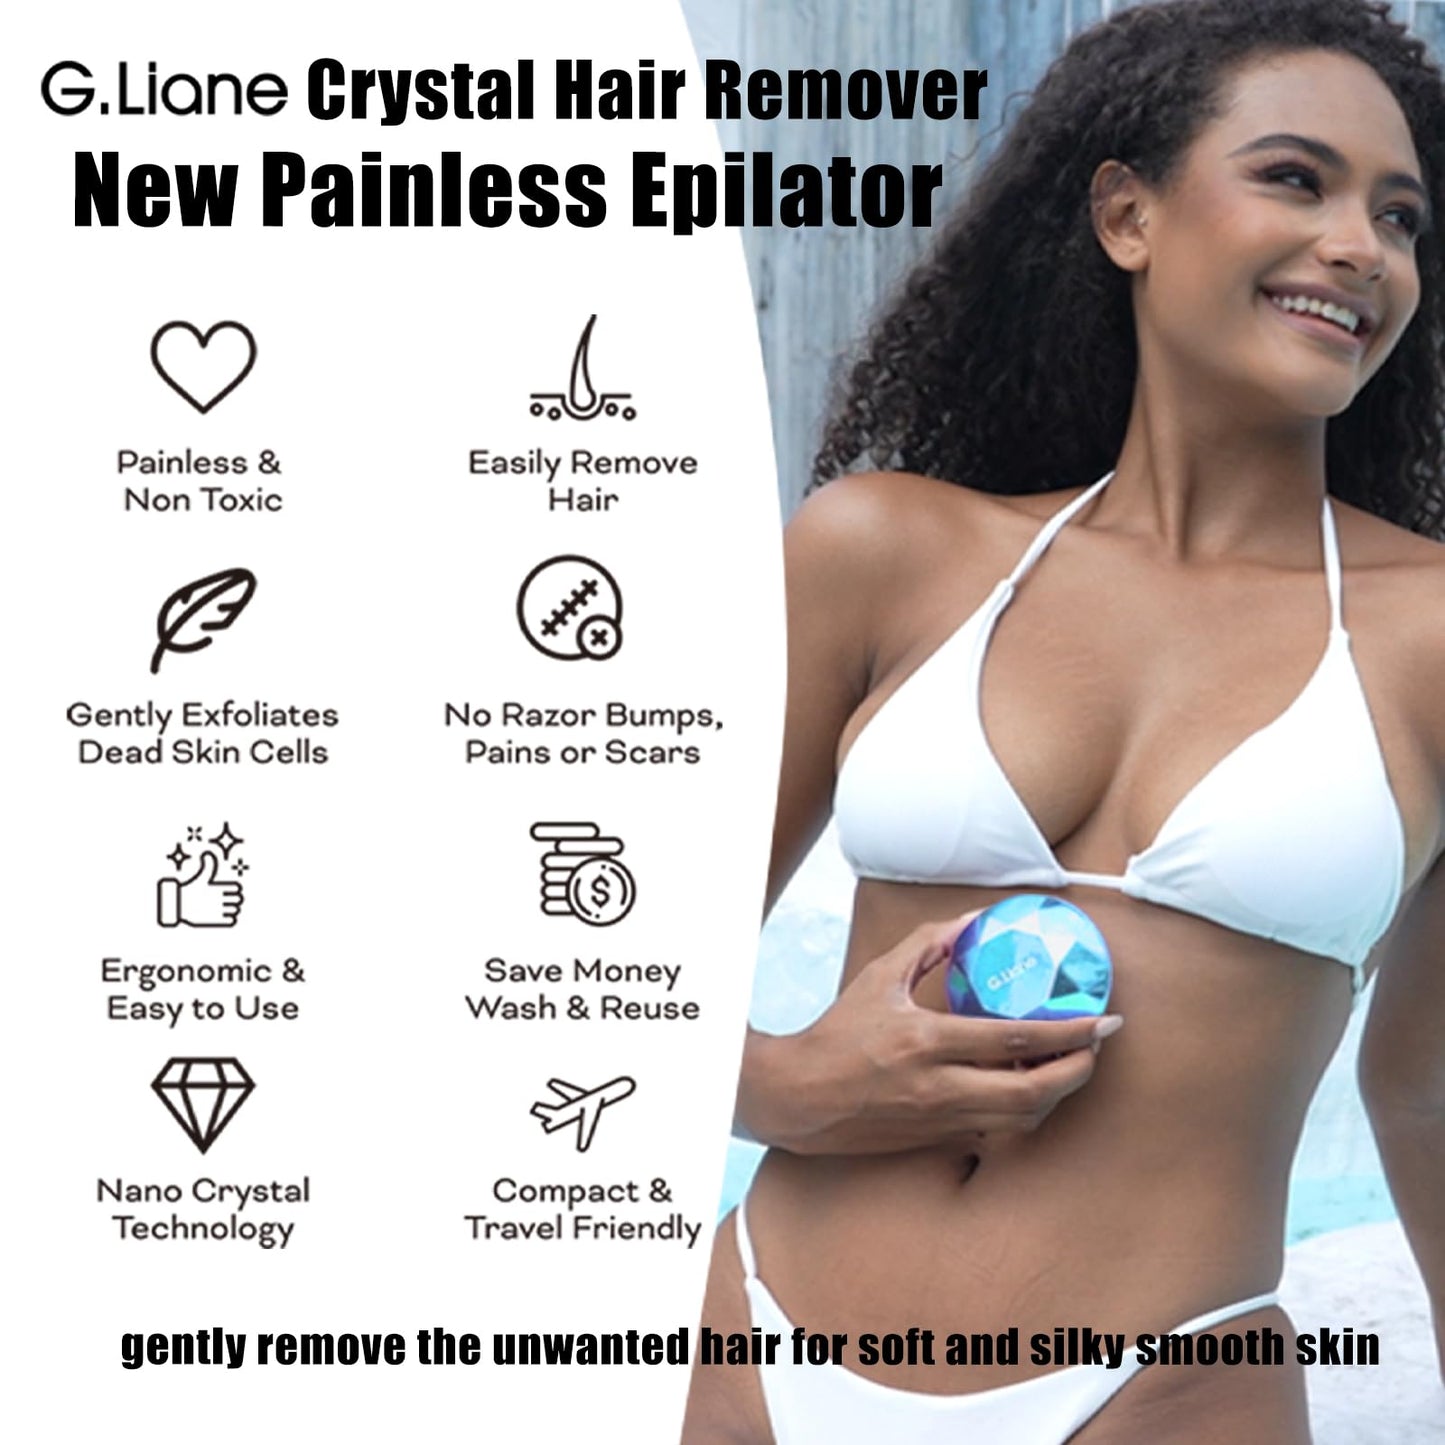 G.Liane Crystal Hair Eraser,Painless Crystal Hair Remover Diamond,Exfoliation Hair Removal Device Without Waxing,Natural Lady Hair Trimmer and Shaver for Women and Men(Royal Blue)